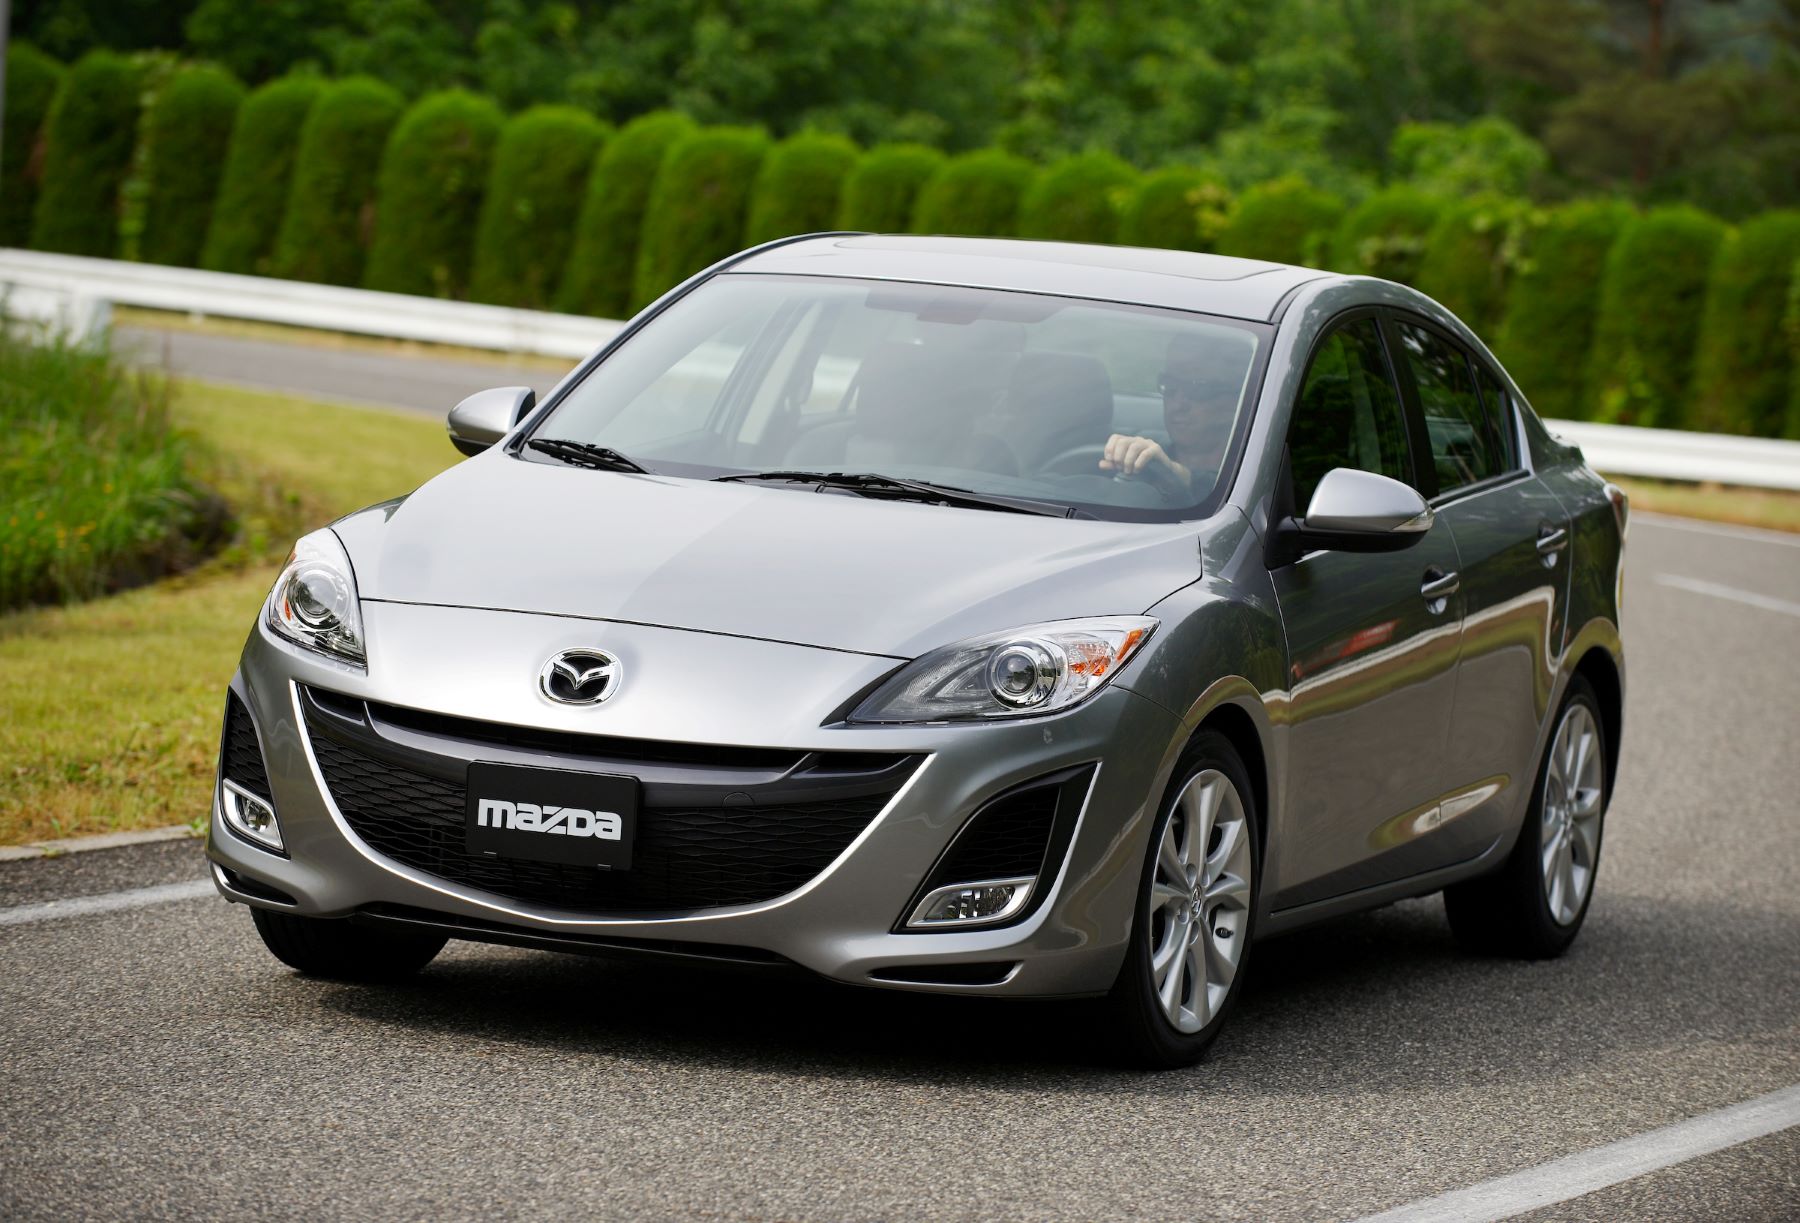 The 2010 Mazda3 sedan displayed significant Mazda3 reliability issues on the road